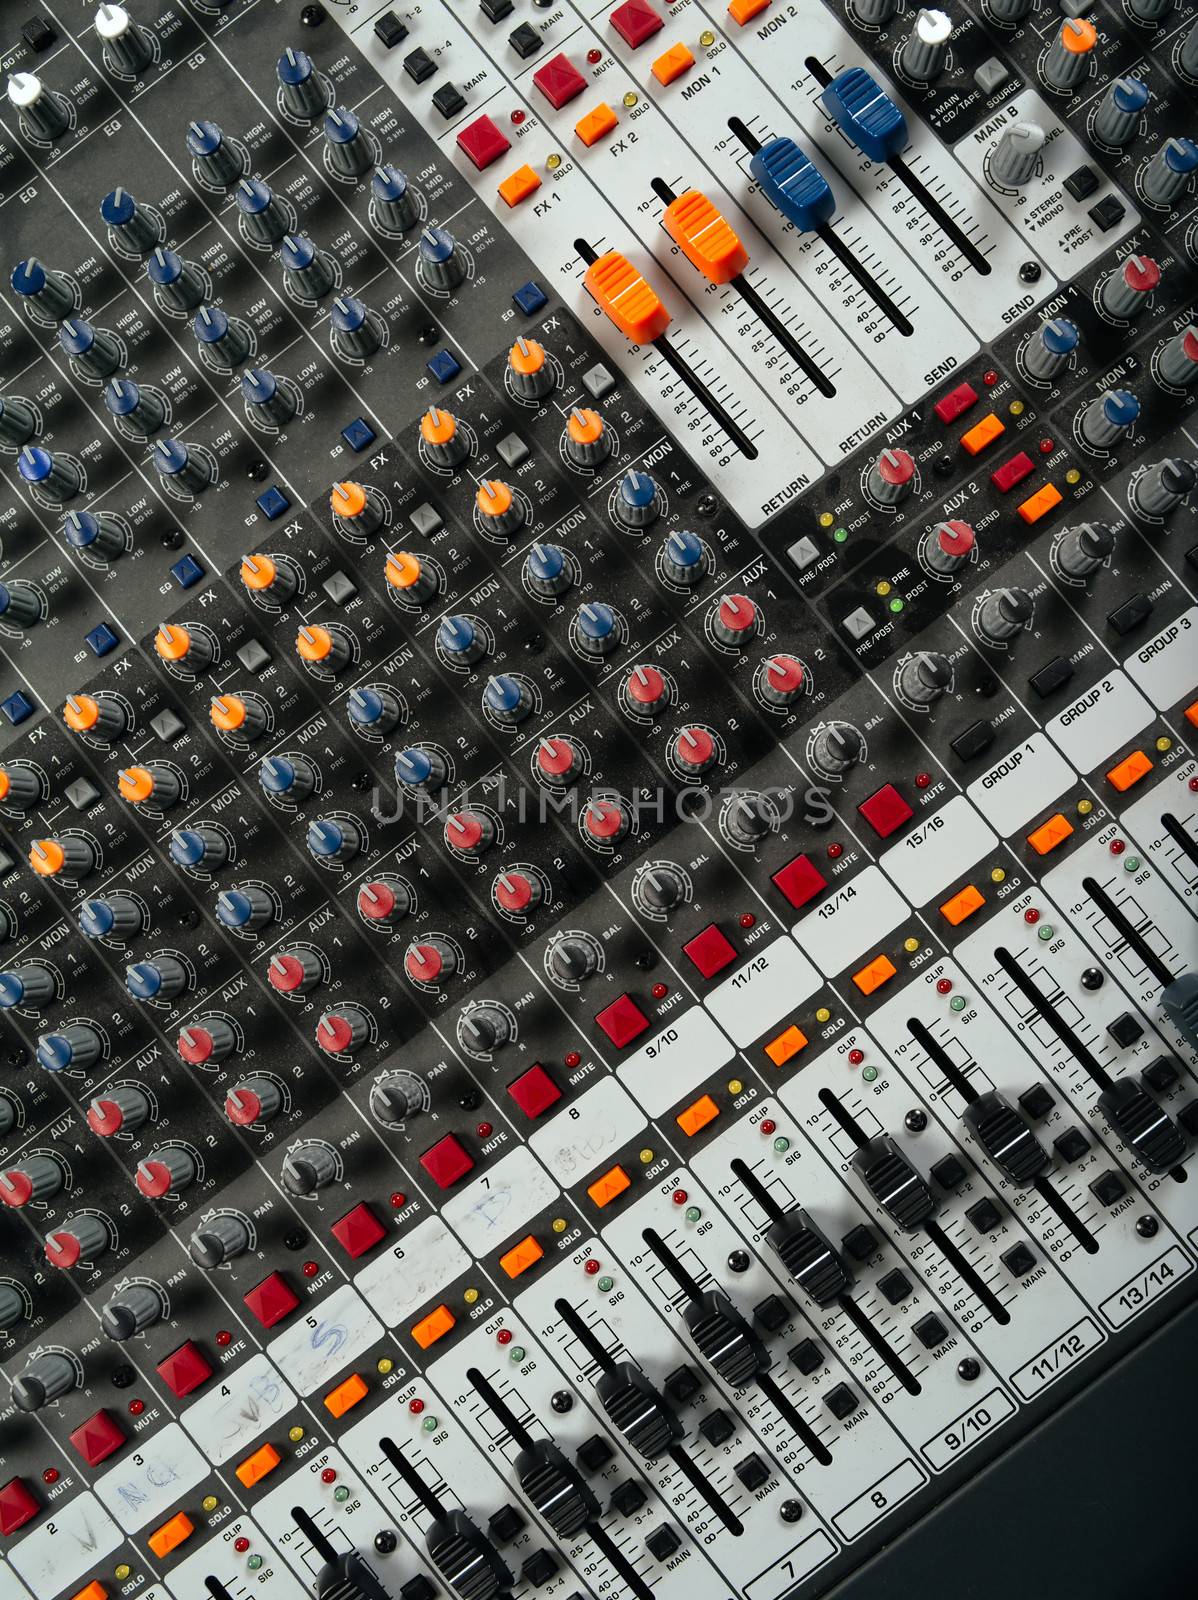 Photo of a recording studio mixer from above.